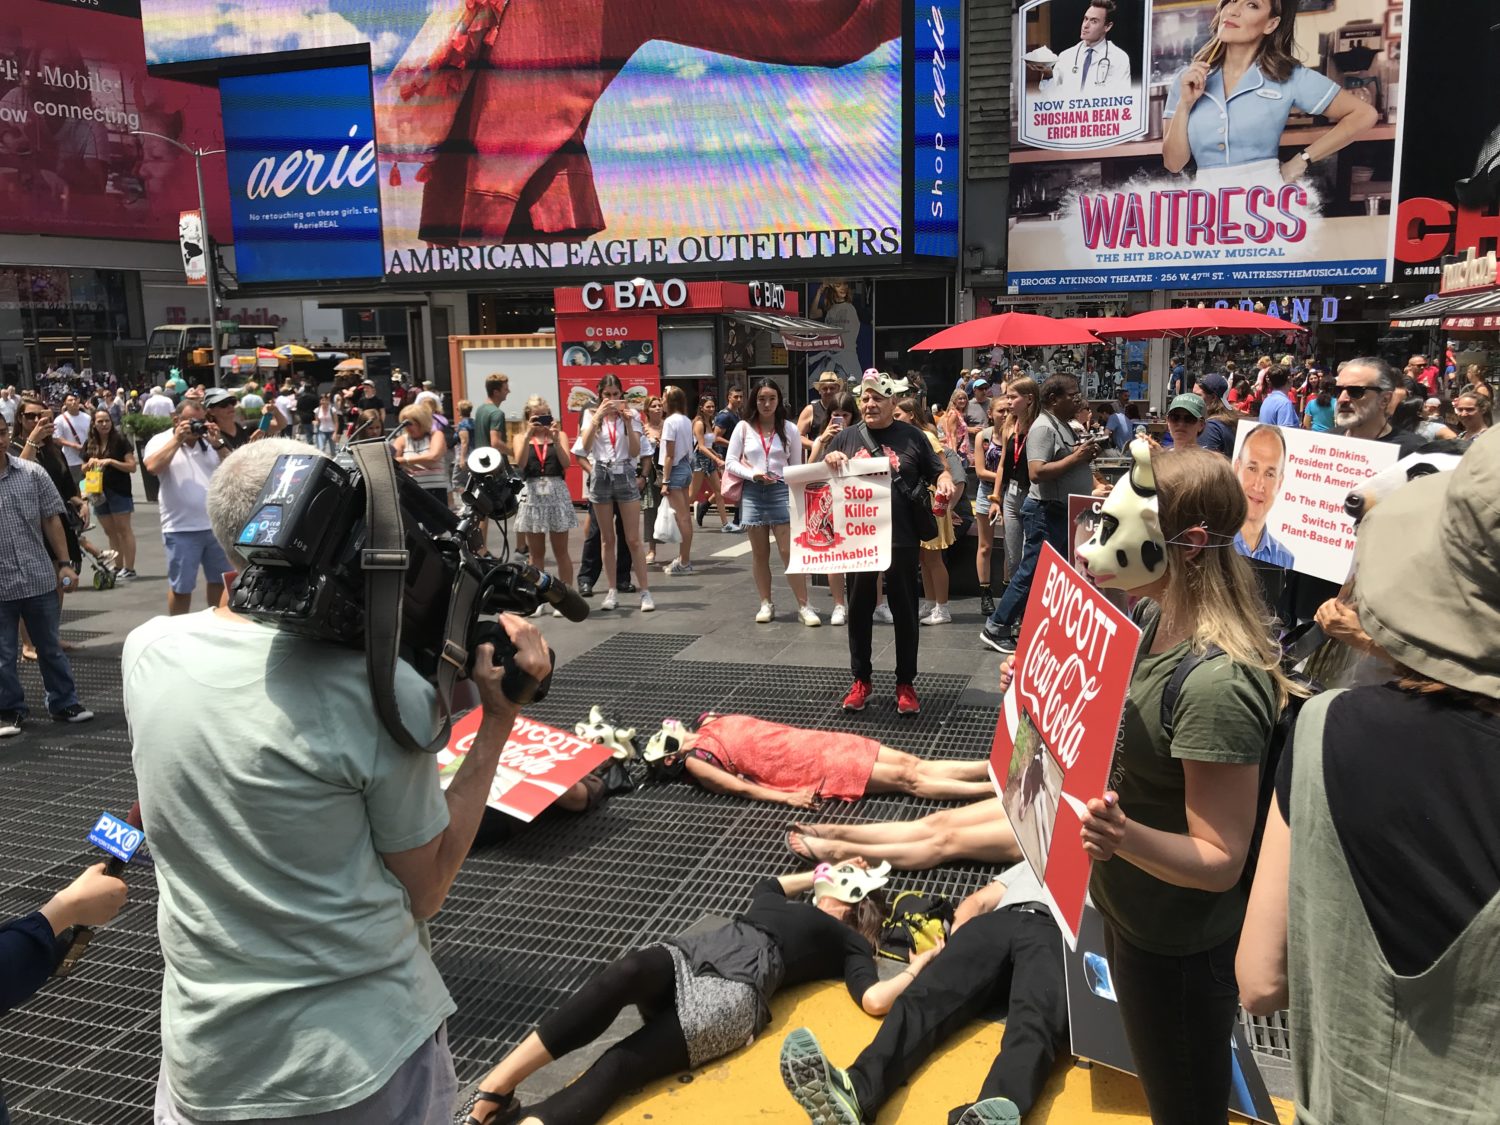 Times Square protest draws crowds.